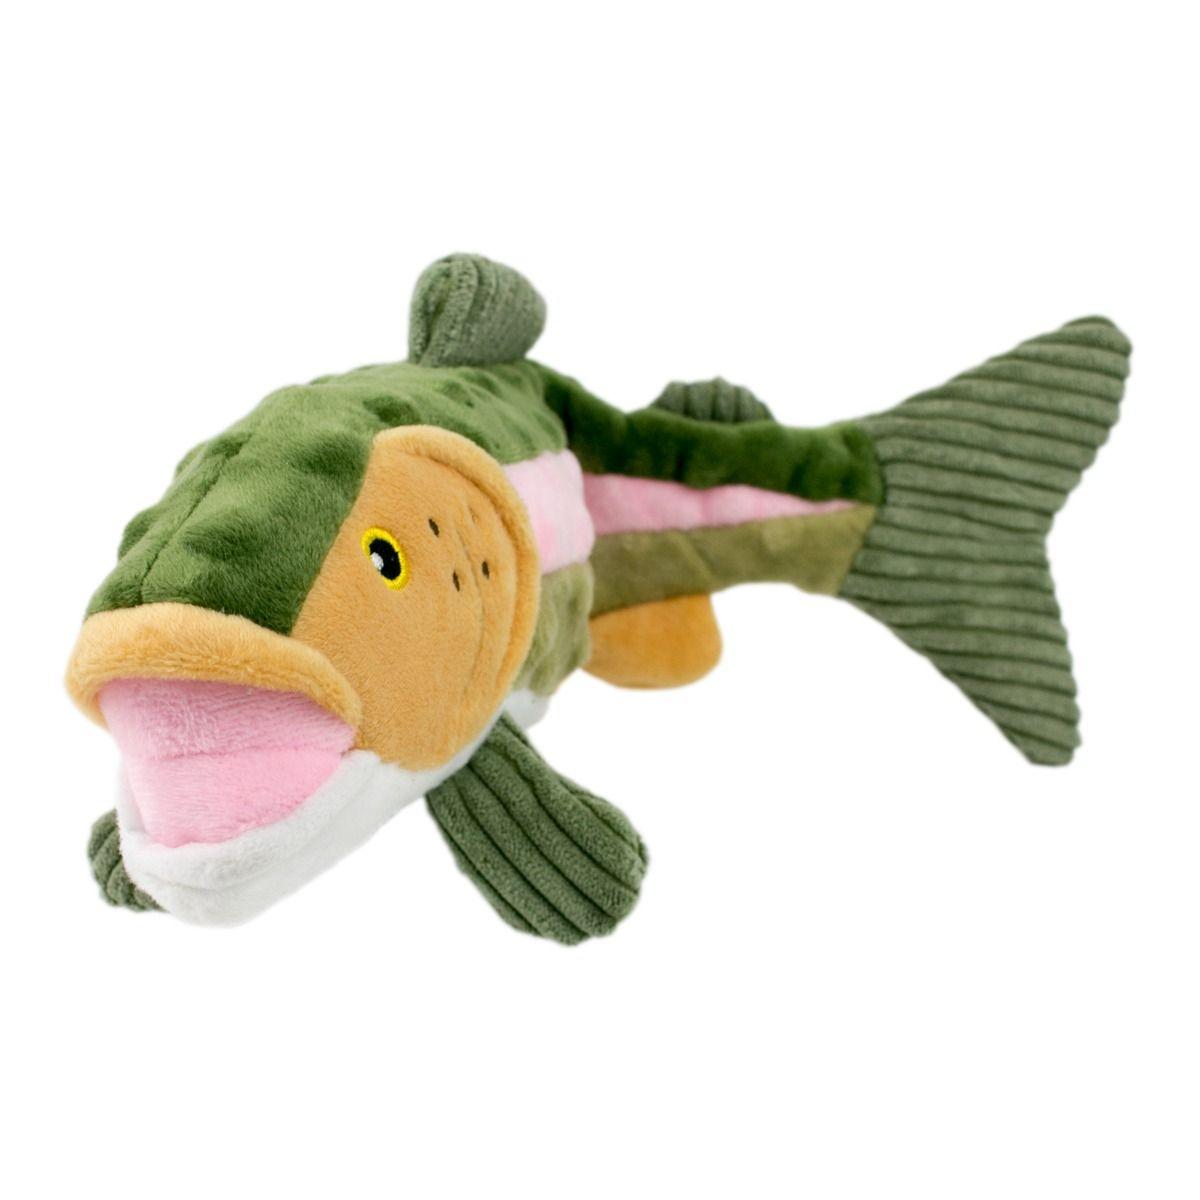 Tall Tails Animated Dog Toy - Trout